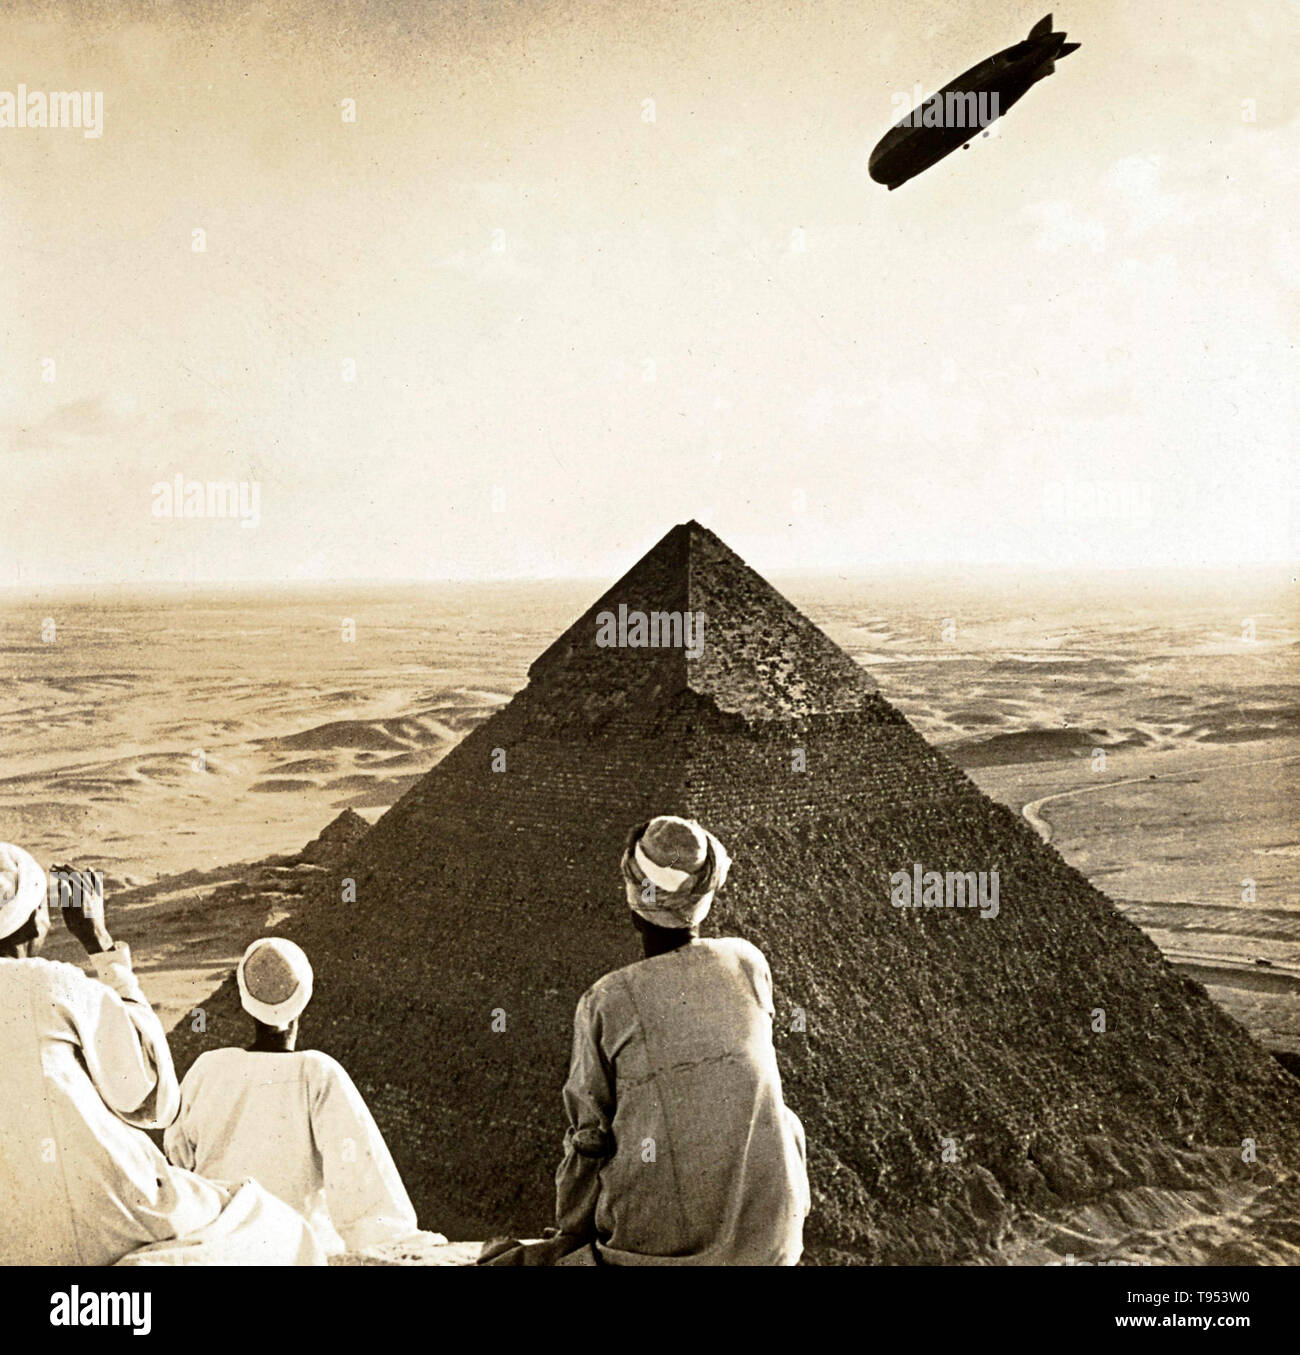 Croppedstereograph of the Graf Zeppelin over the Giza pyramids in Egypt, on April 10, 1931. The LZ 127 Graf Zeppelin was a German-built and -operated, passenger-carrying, hydrogen-filled, rigid airship which operated commercially from 1928 to 1937. When it entered commercial service in 1928, it became the first commercial passenger transatlantic flight service in the world. Stock Photo